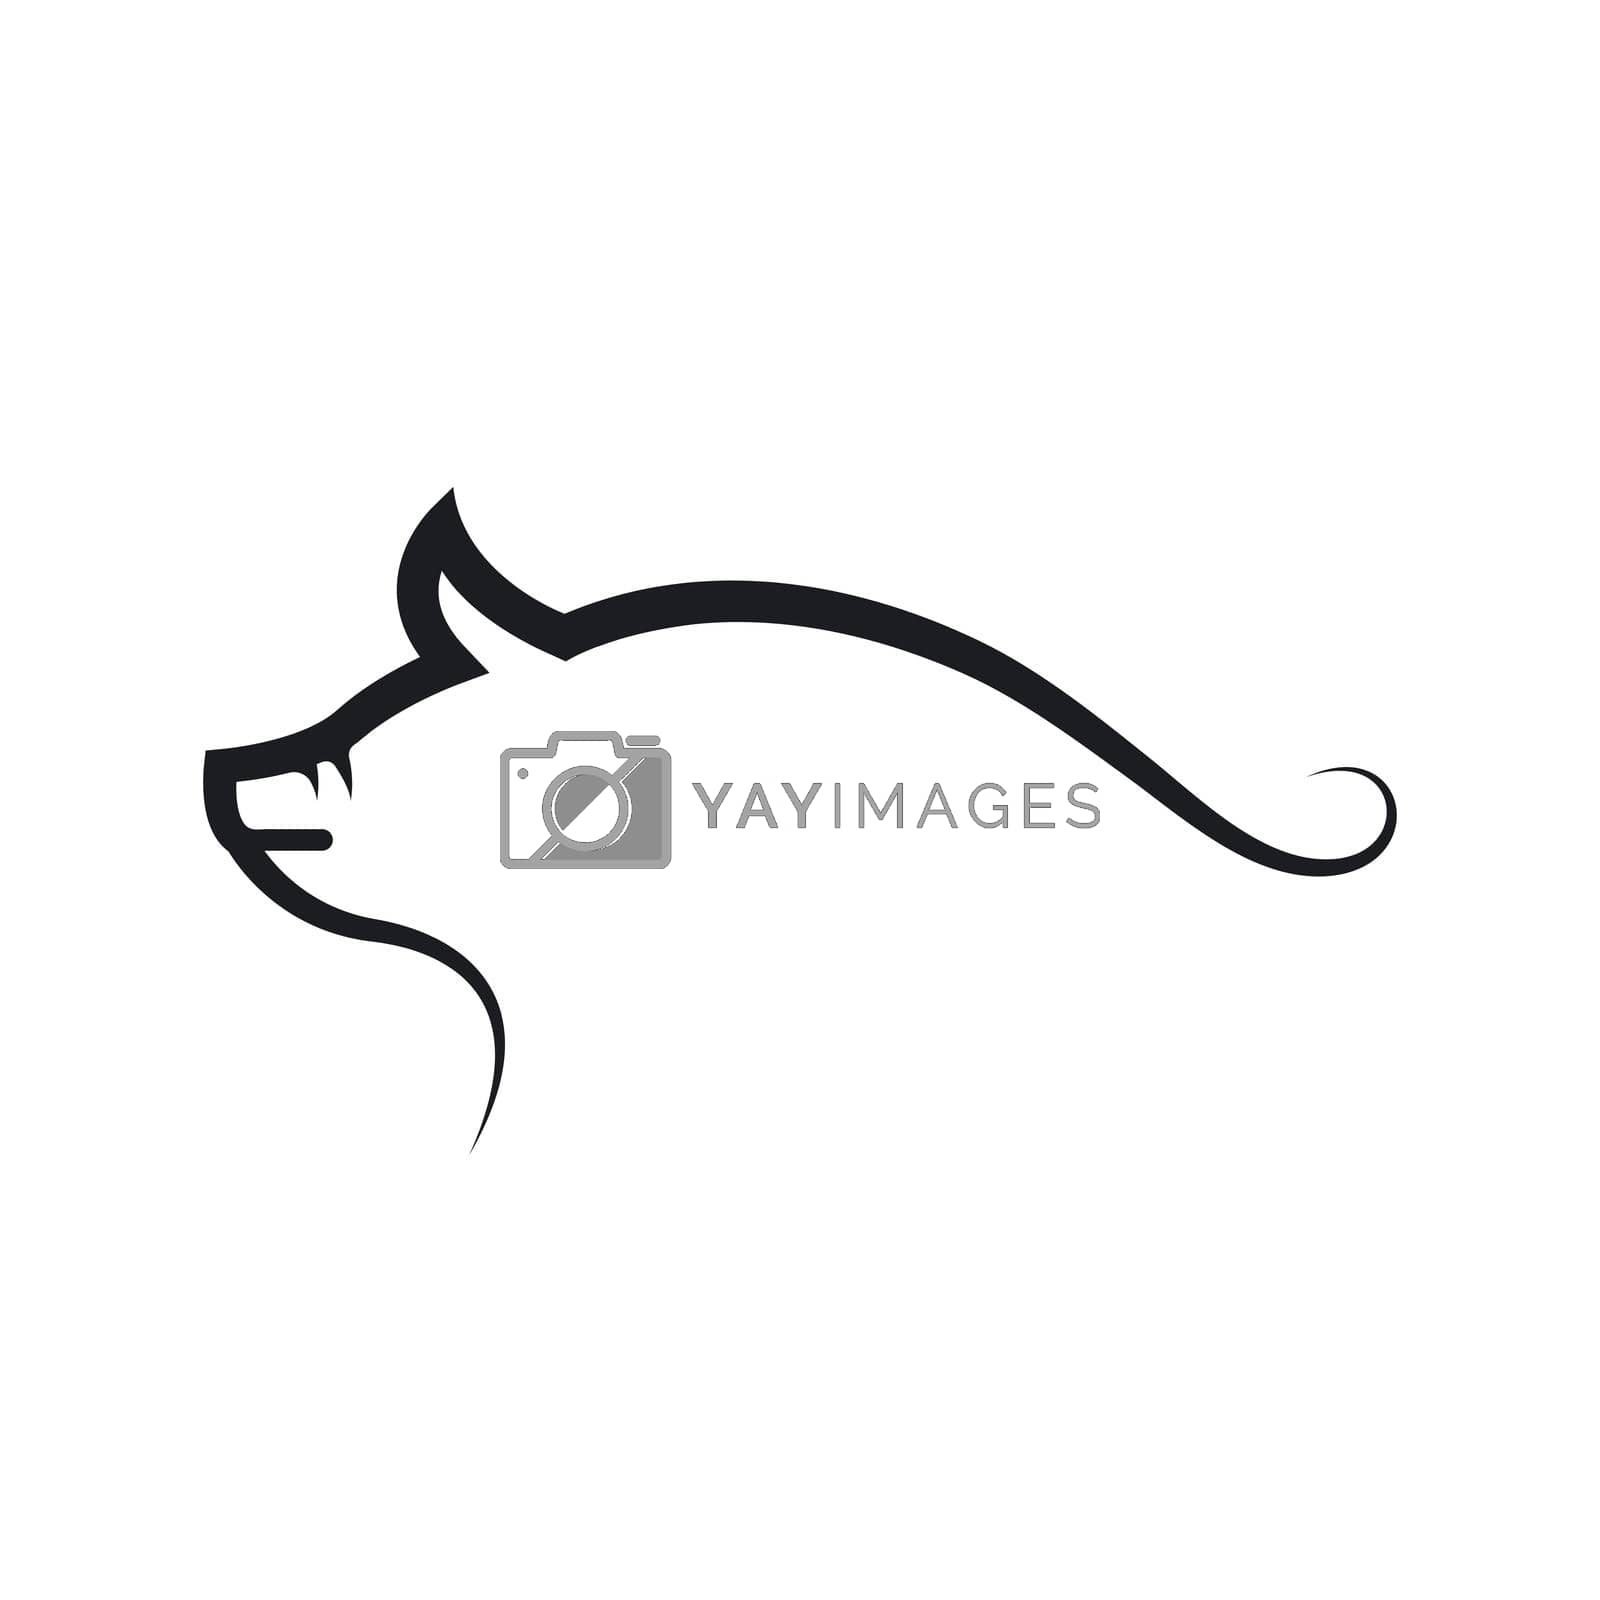 Royalty free image of pig vector icon illustration design by idan